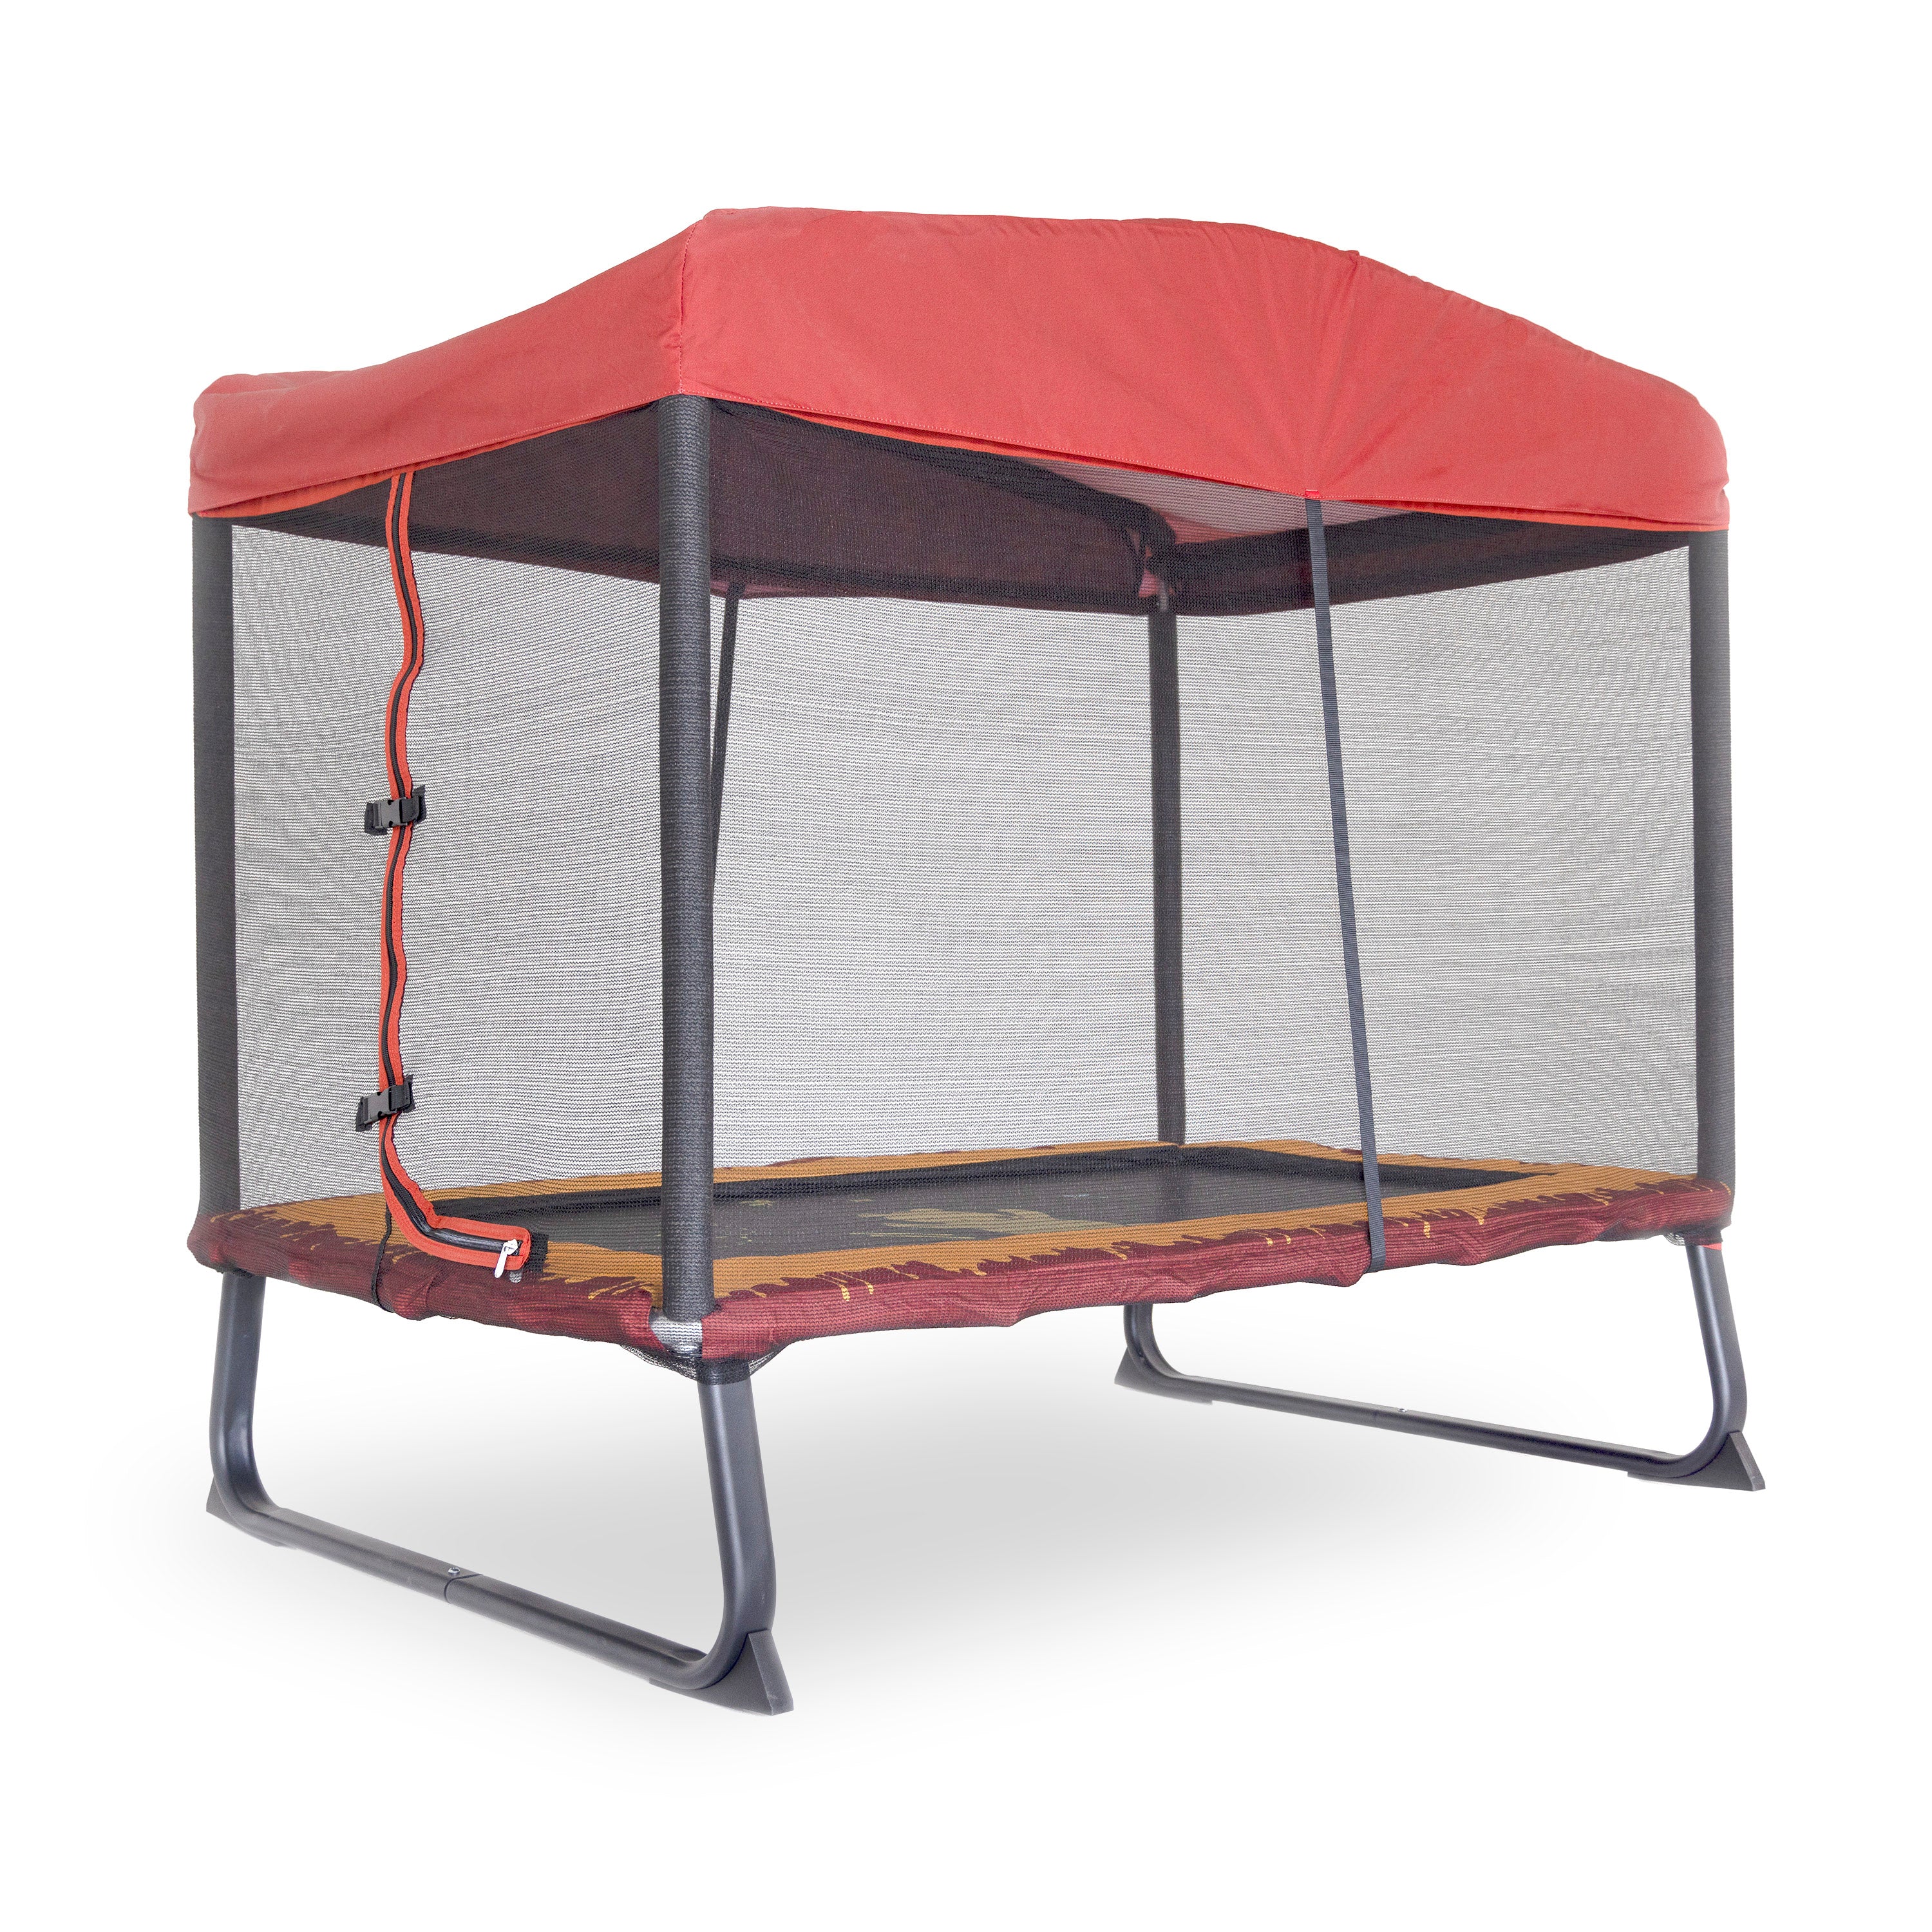 The rectangle 6ft x 4ft trampoline has a black enclosure net, a red canopy, a red and yellow spring pad, and a Winnie the Pooh design printed on the jump mat. 